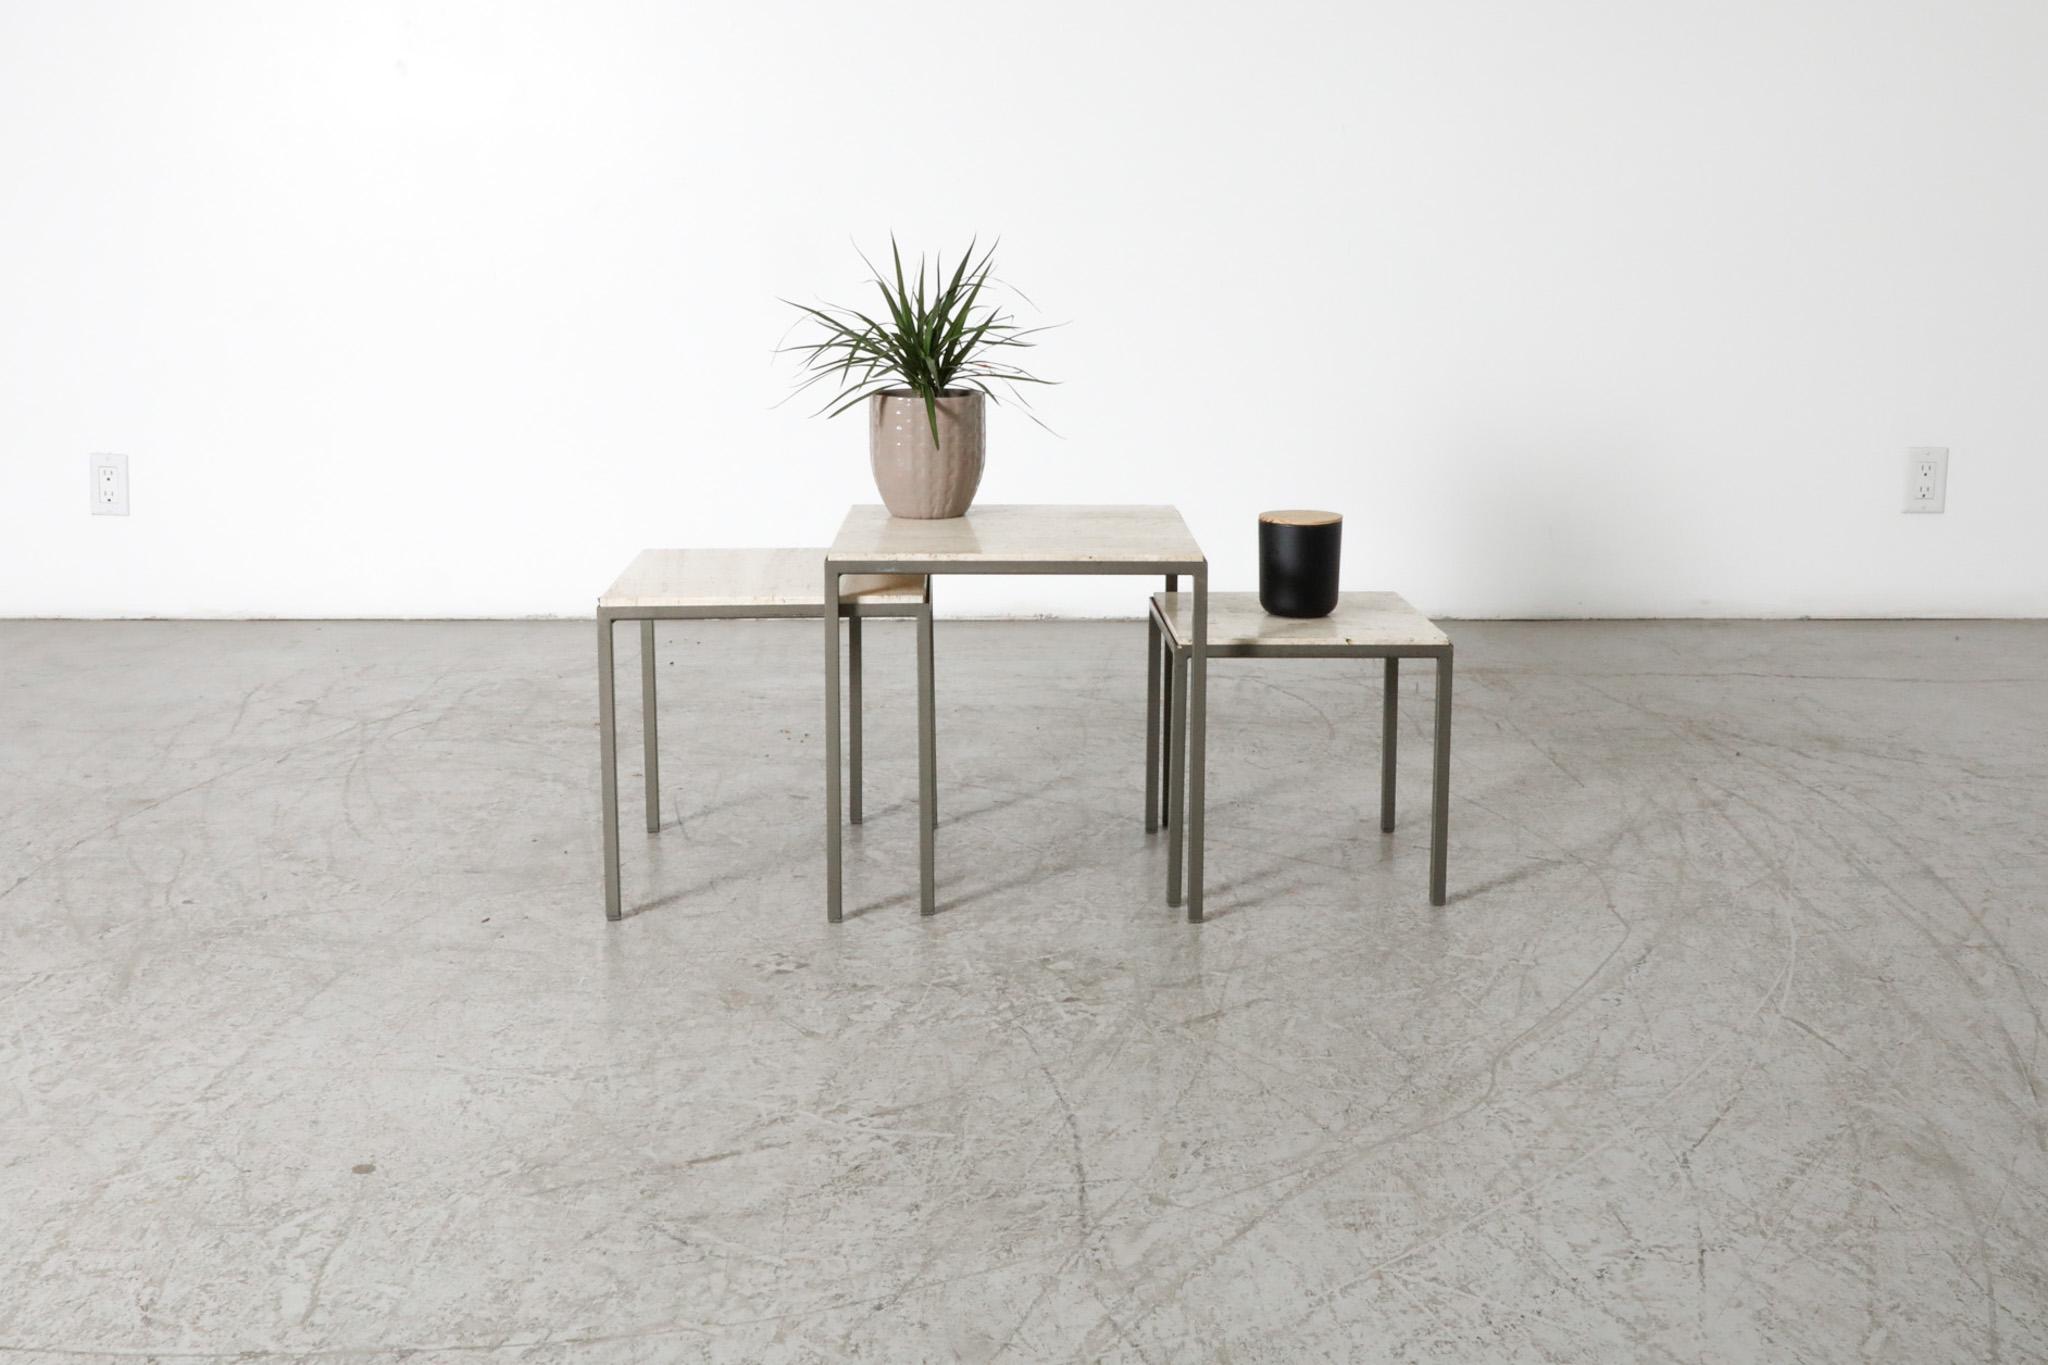 Set of 3 Mid-Century Artimeta attributed nesting tables. Artimeta was founded by Floris H.  Fiedeldij in 1960 and produced luxury lighting and furniture. Gray metal bases paired with beautiful inset travertine tops. In original condition with some